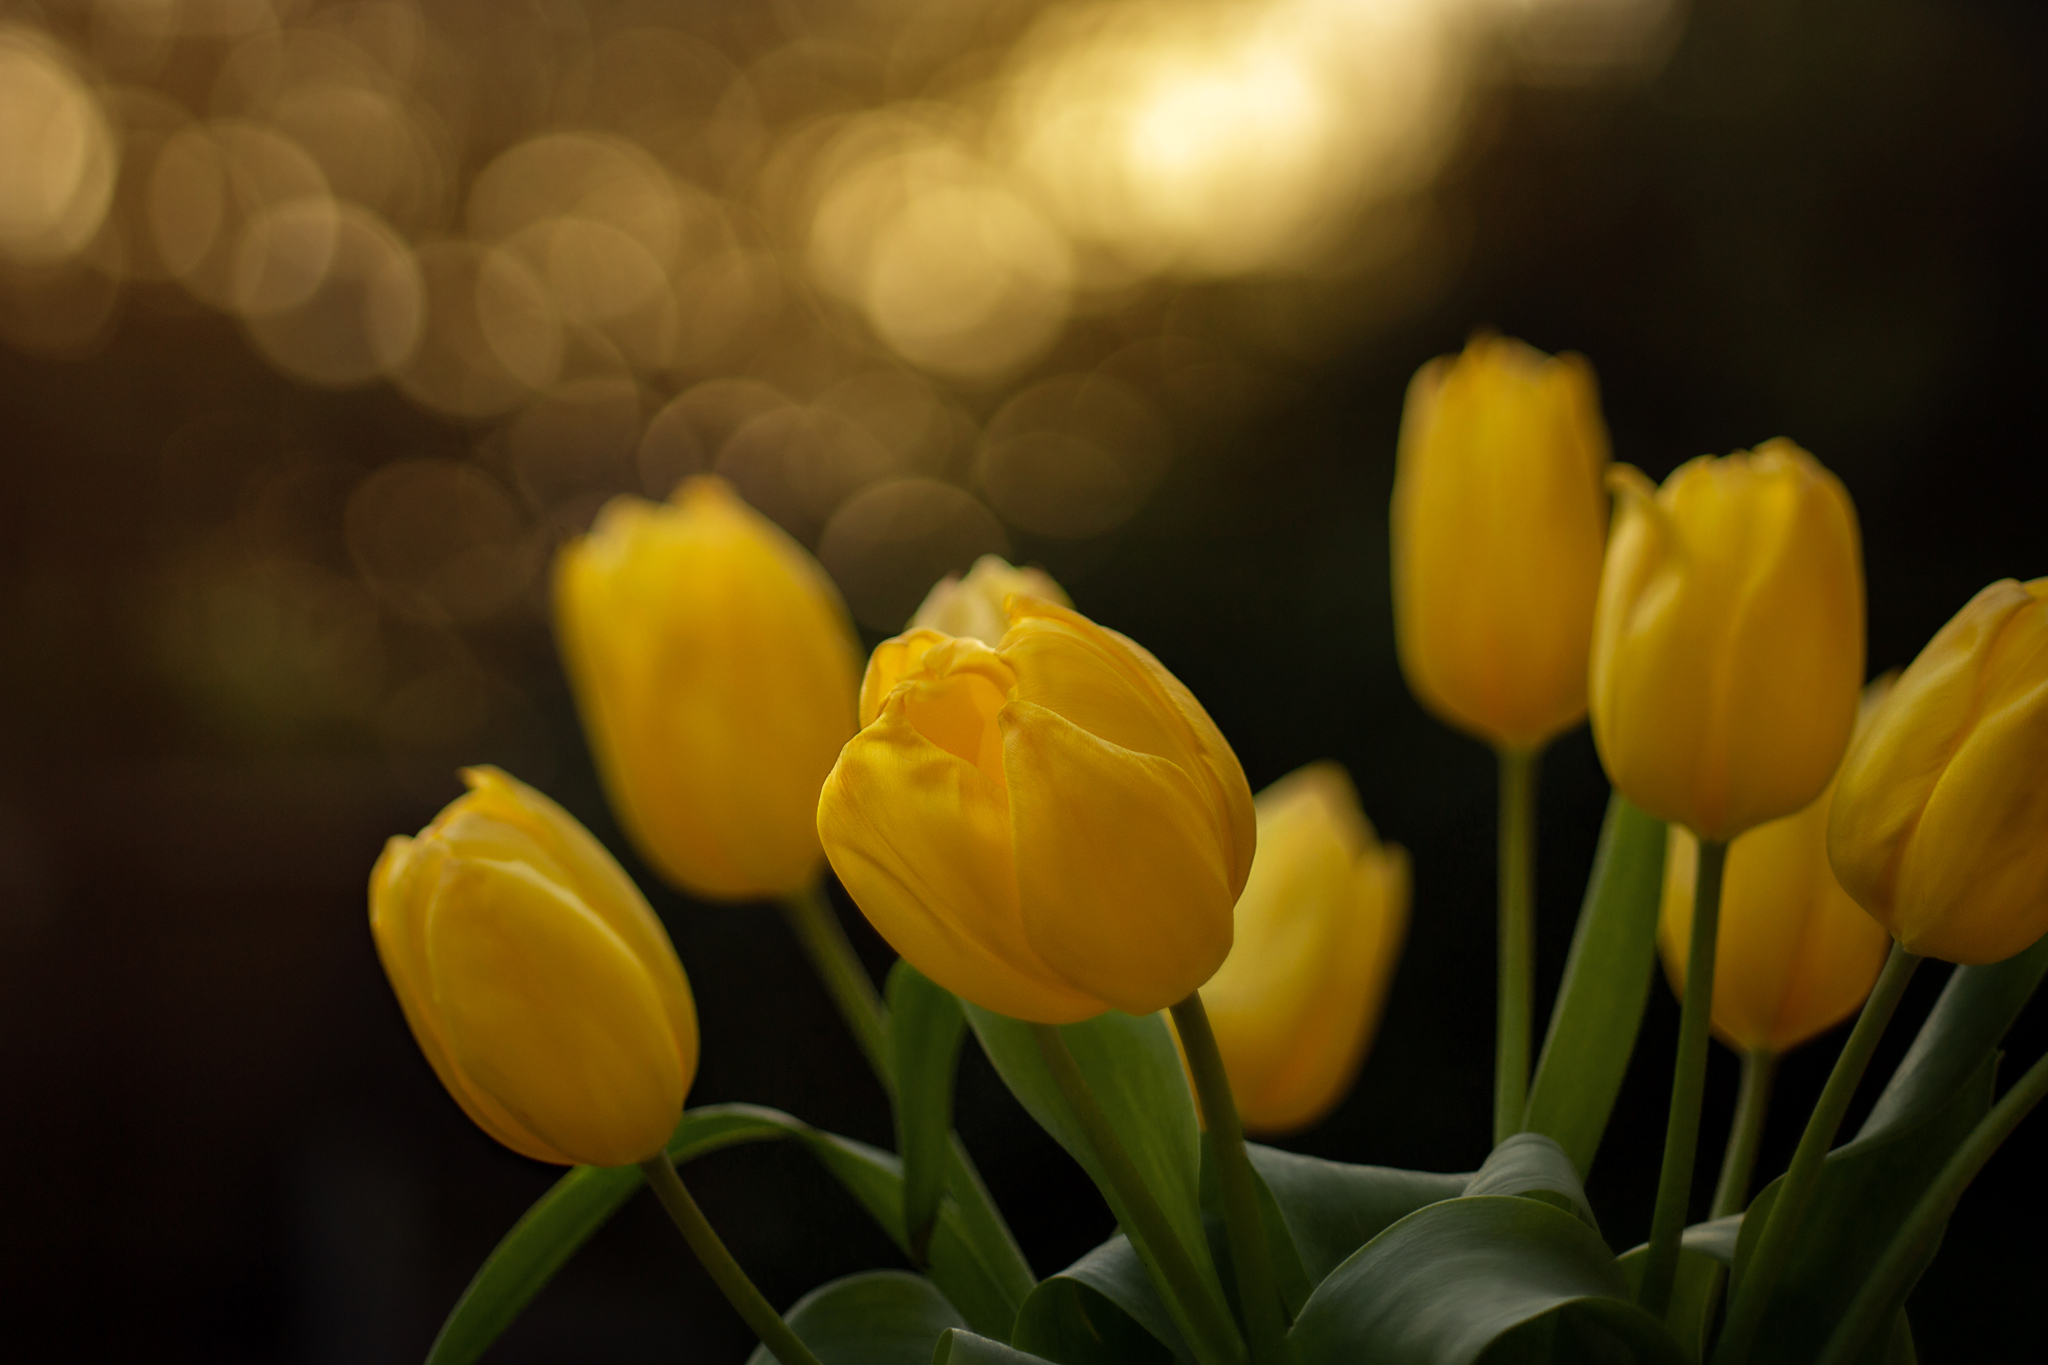 Getting Creative with photography - Freelensed Tulips